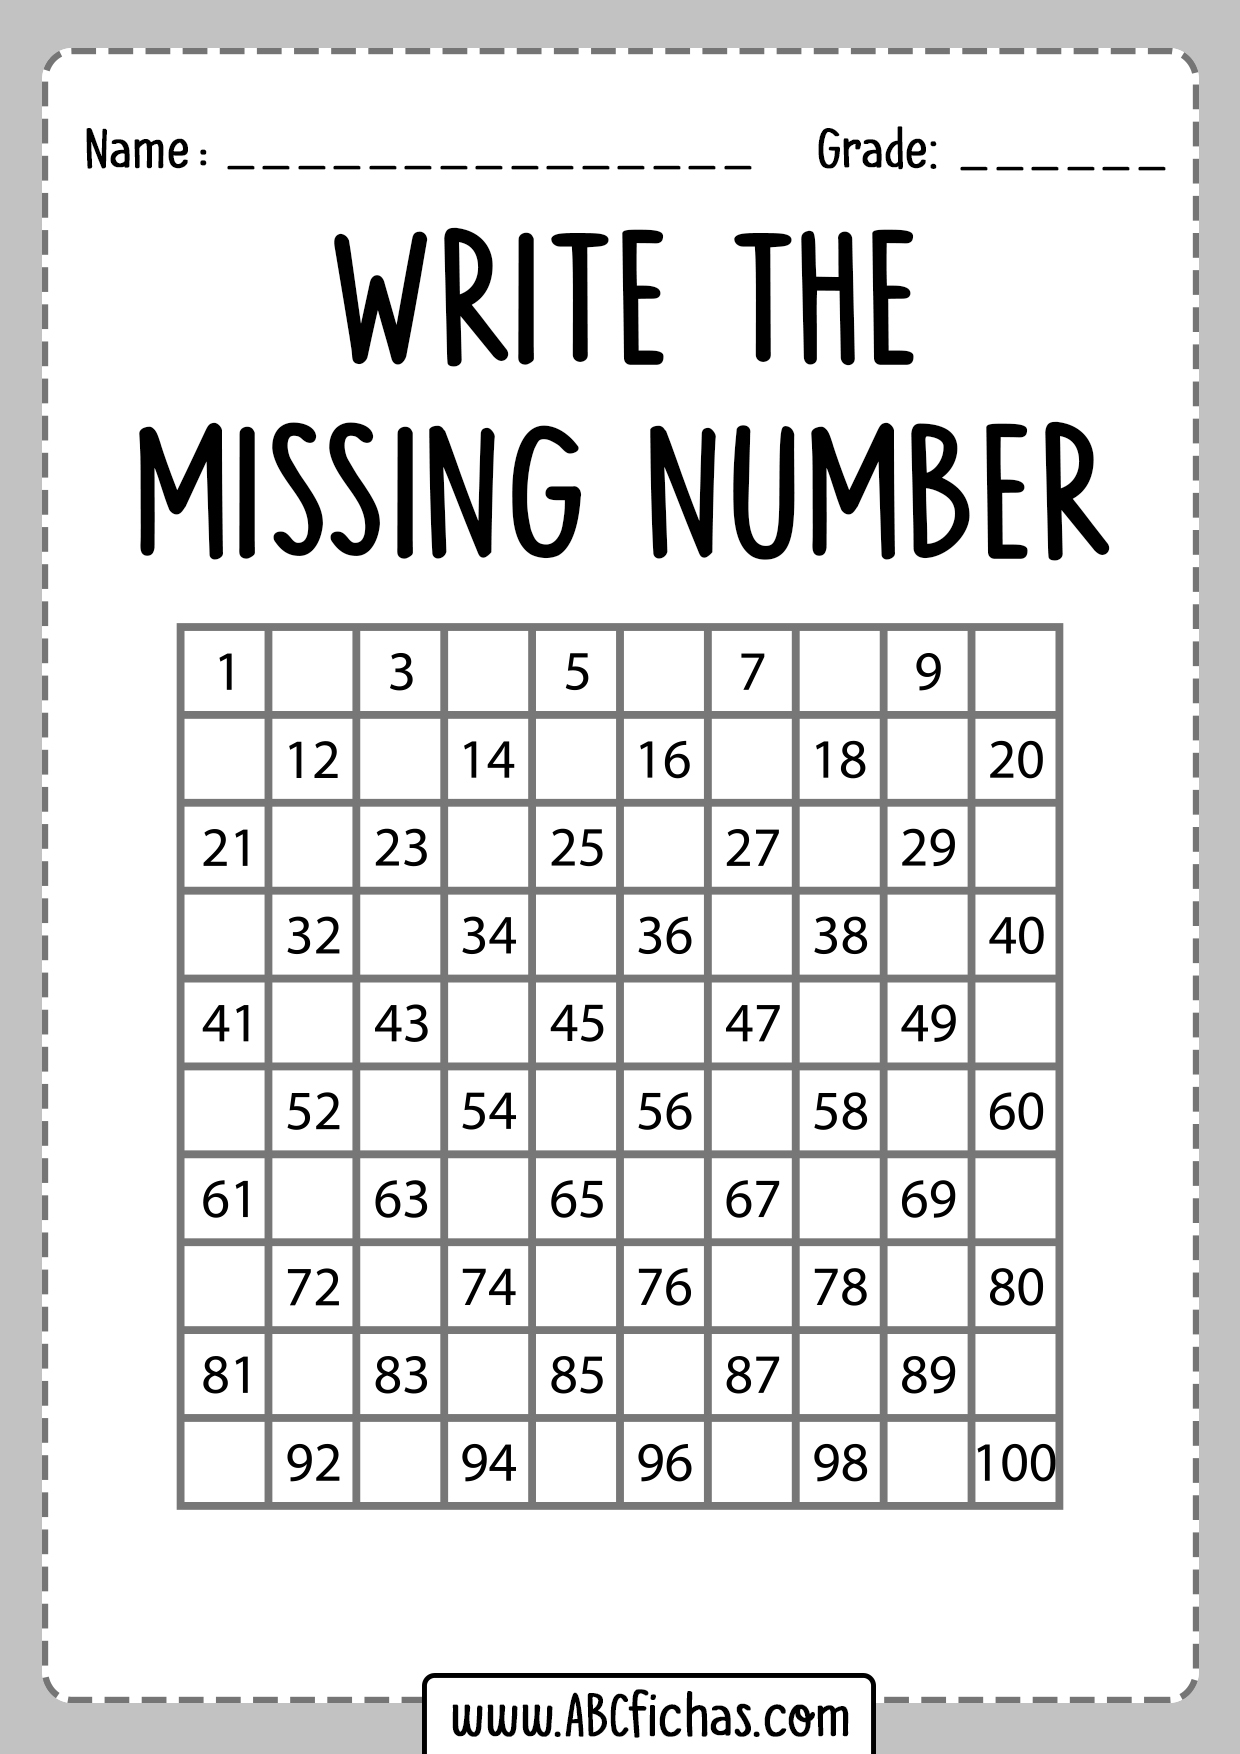 Write the missing number worksheets for first grade - ABC Fichas